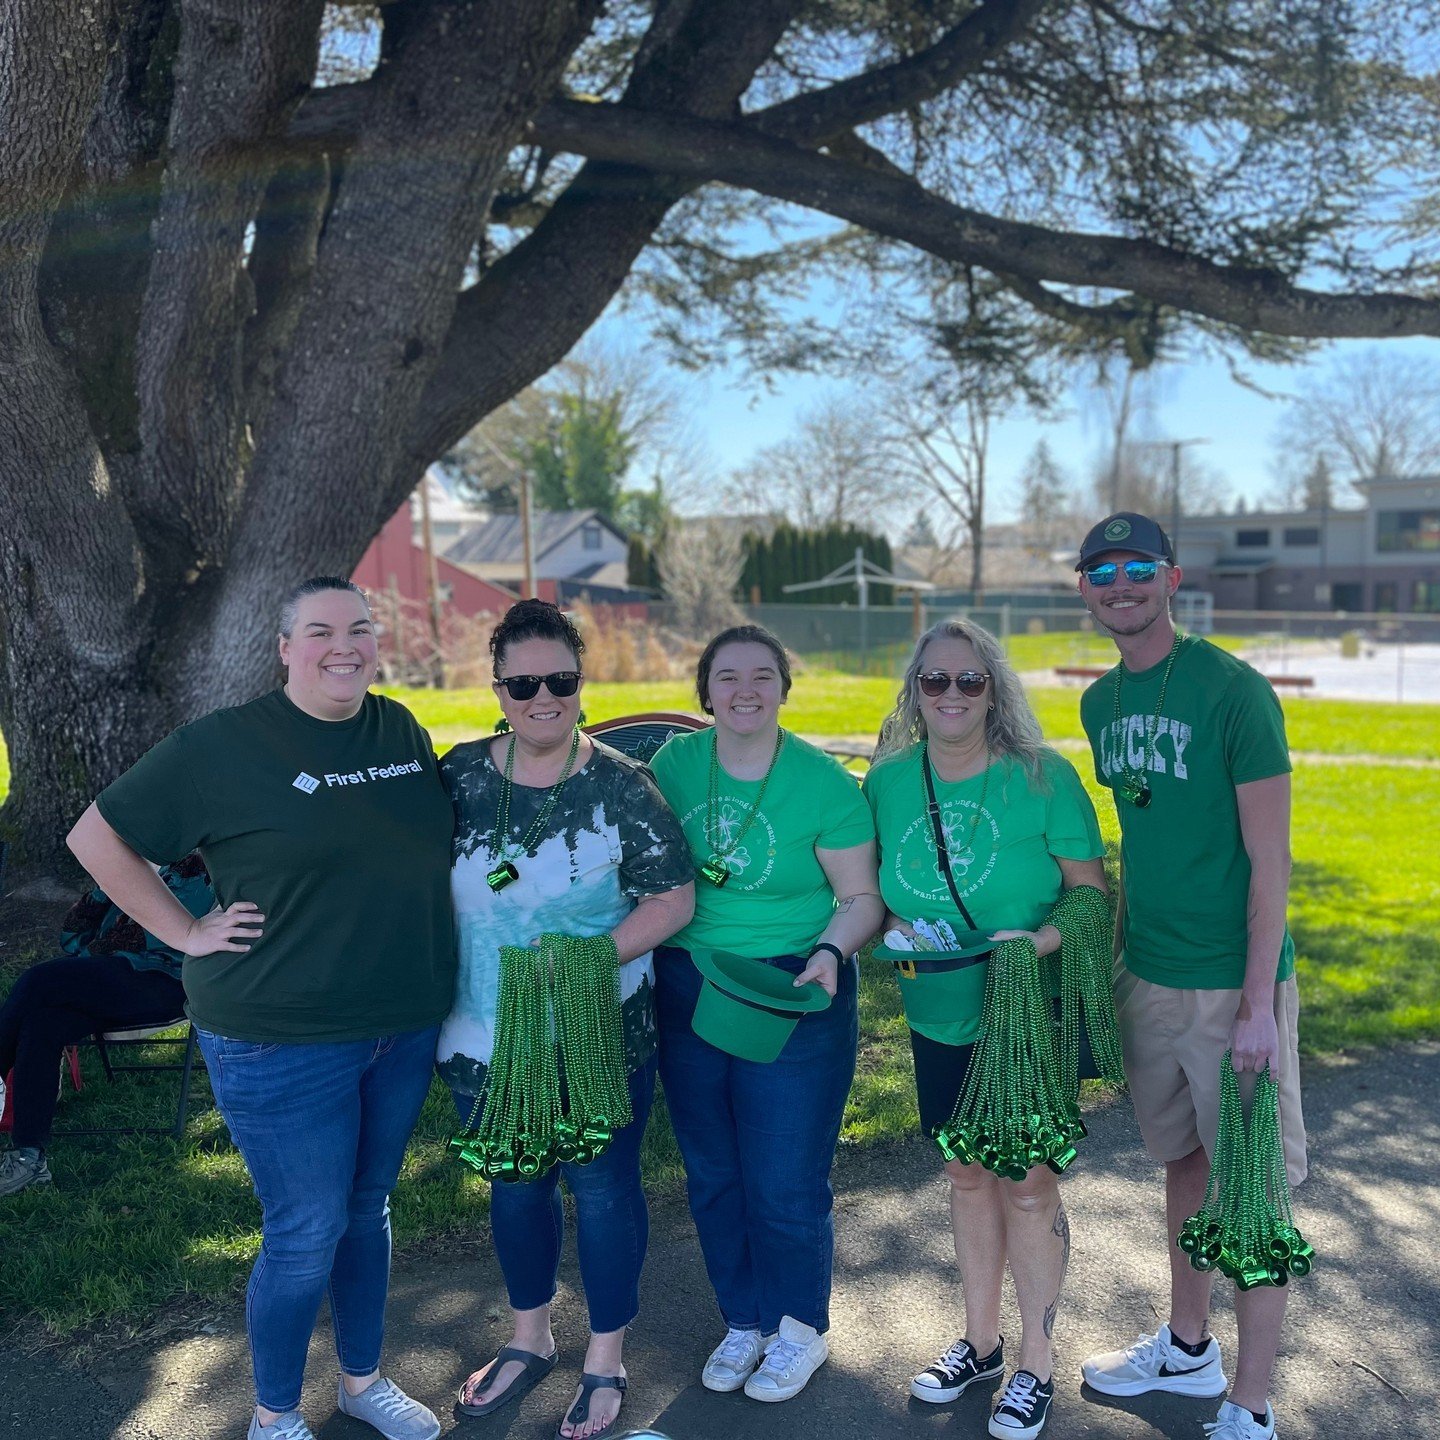 Thank you to our Crawl sponsor and volunteers from @first_federal for making this year's crawl a huge success! 🍀

We want to thank everyone who participated, the businesses for their great specials, and our bagpiper, John Goff (@cascadiapiper), for 